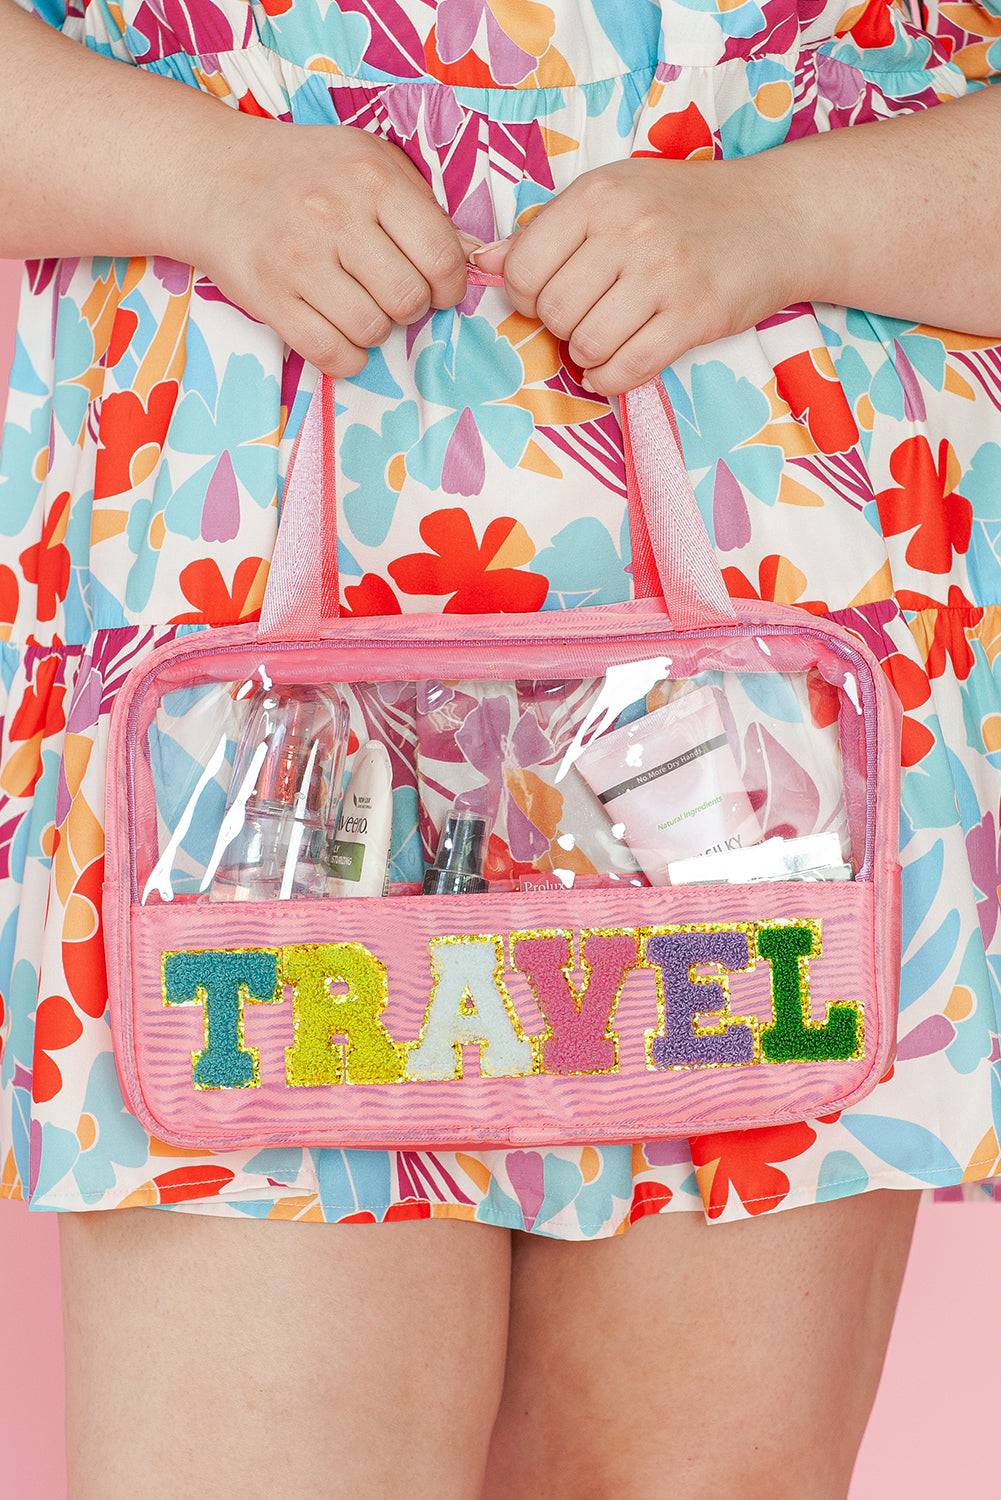 a woman holding a pink travel bag filled with personal items